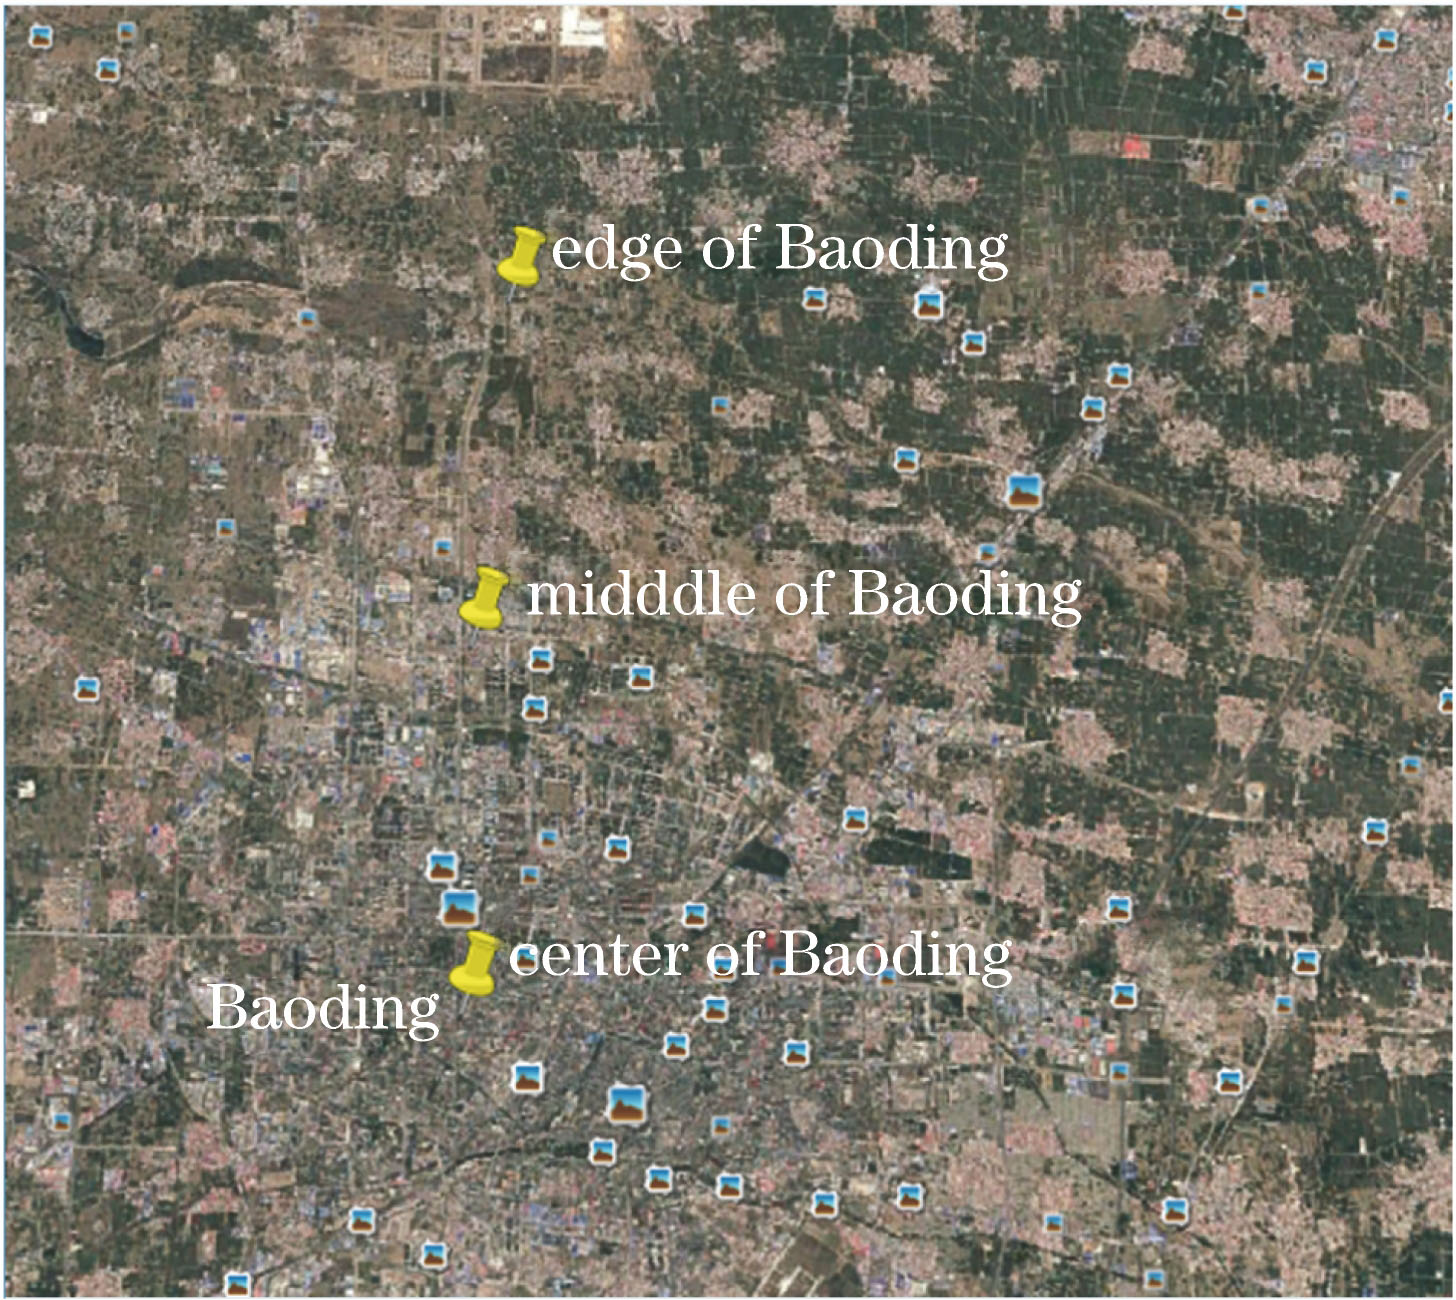 Three selected observation areas of Baoding